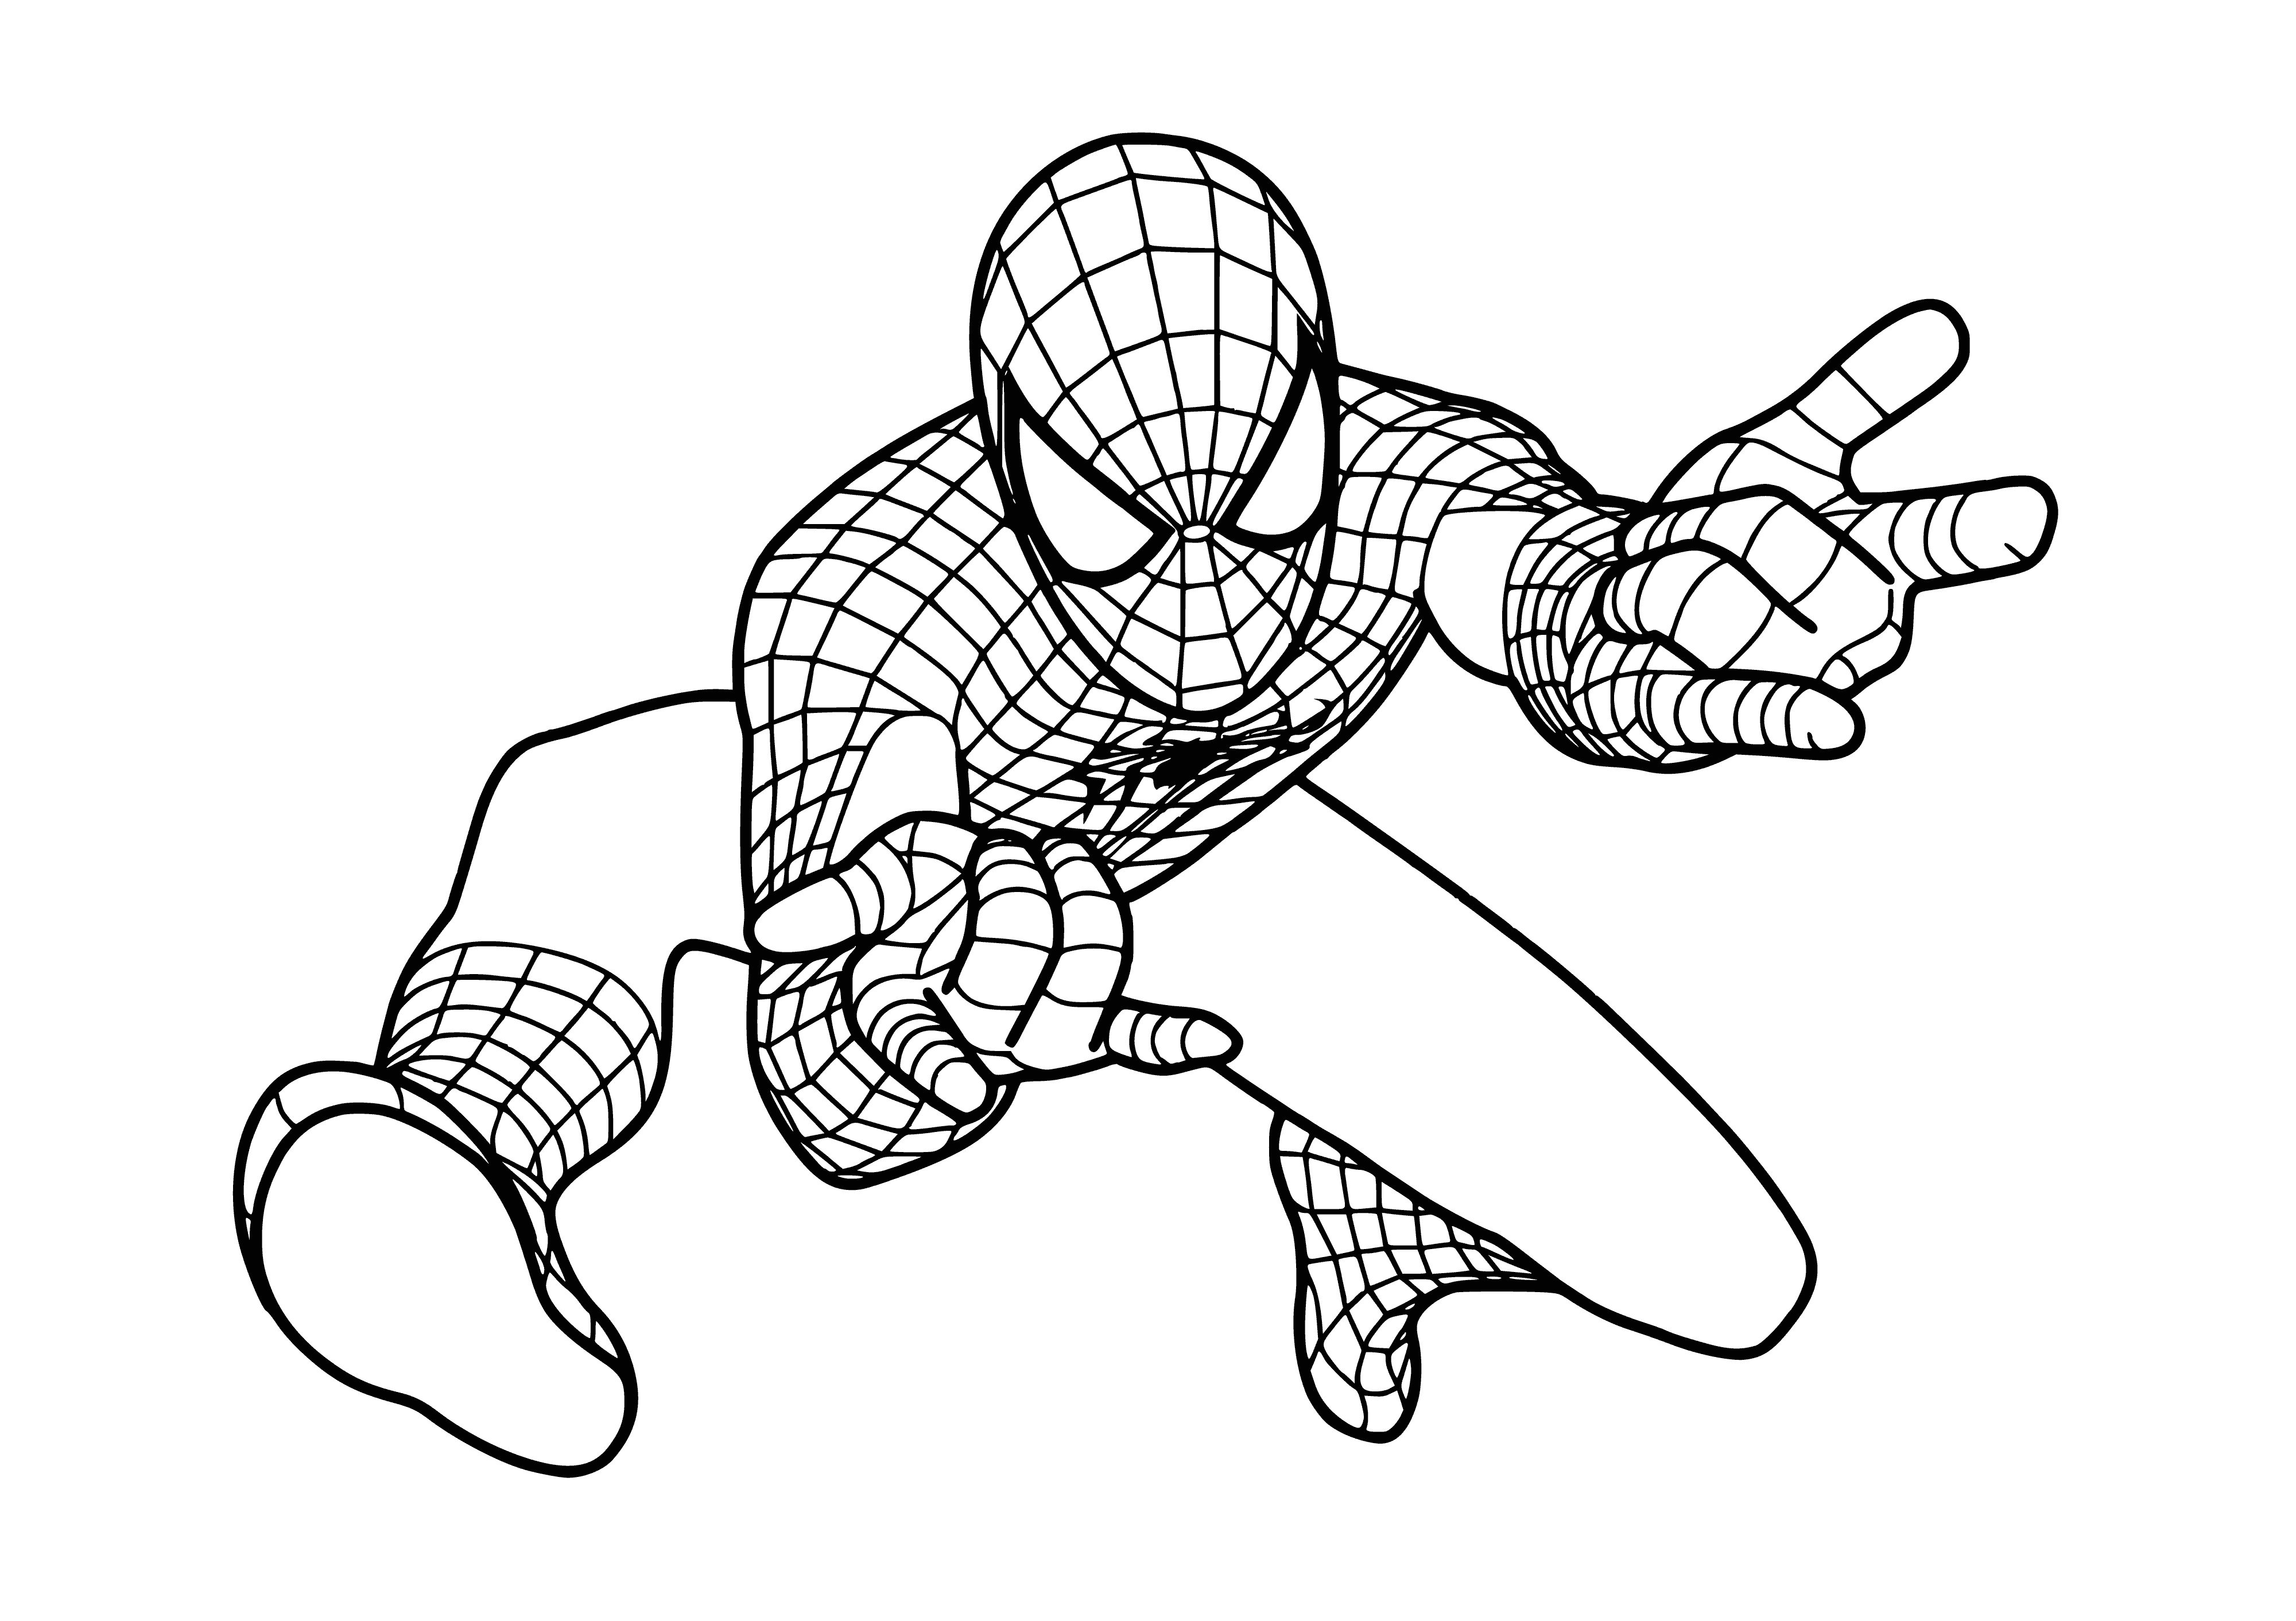 coloring page: Spiderman is a crime-fighting superhero with a red and blue suit, spider symbol and web shooters. He can swing through the city with ease.